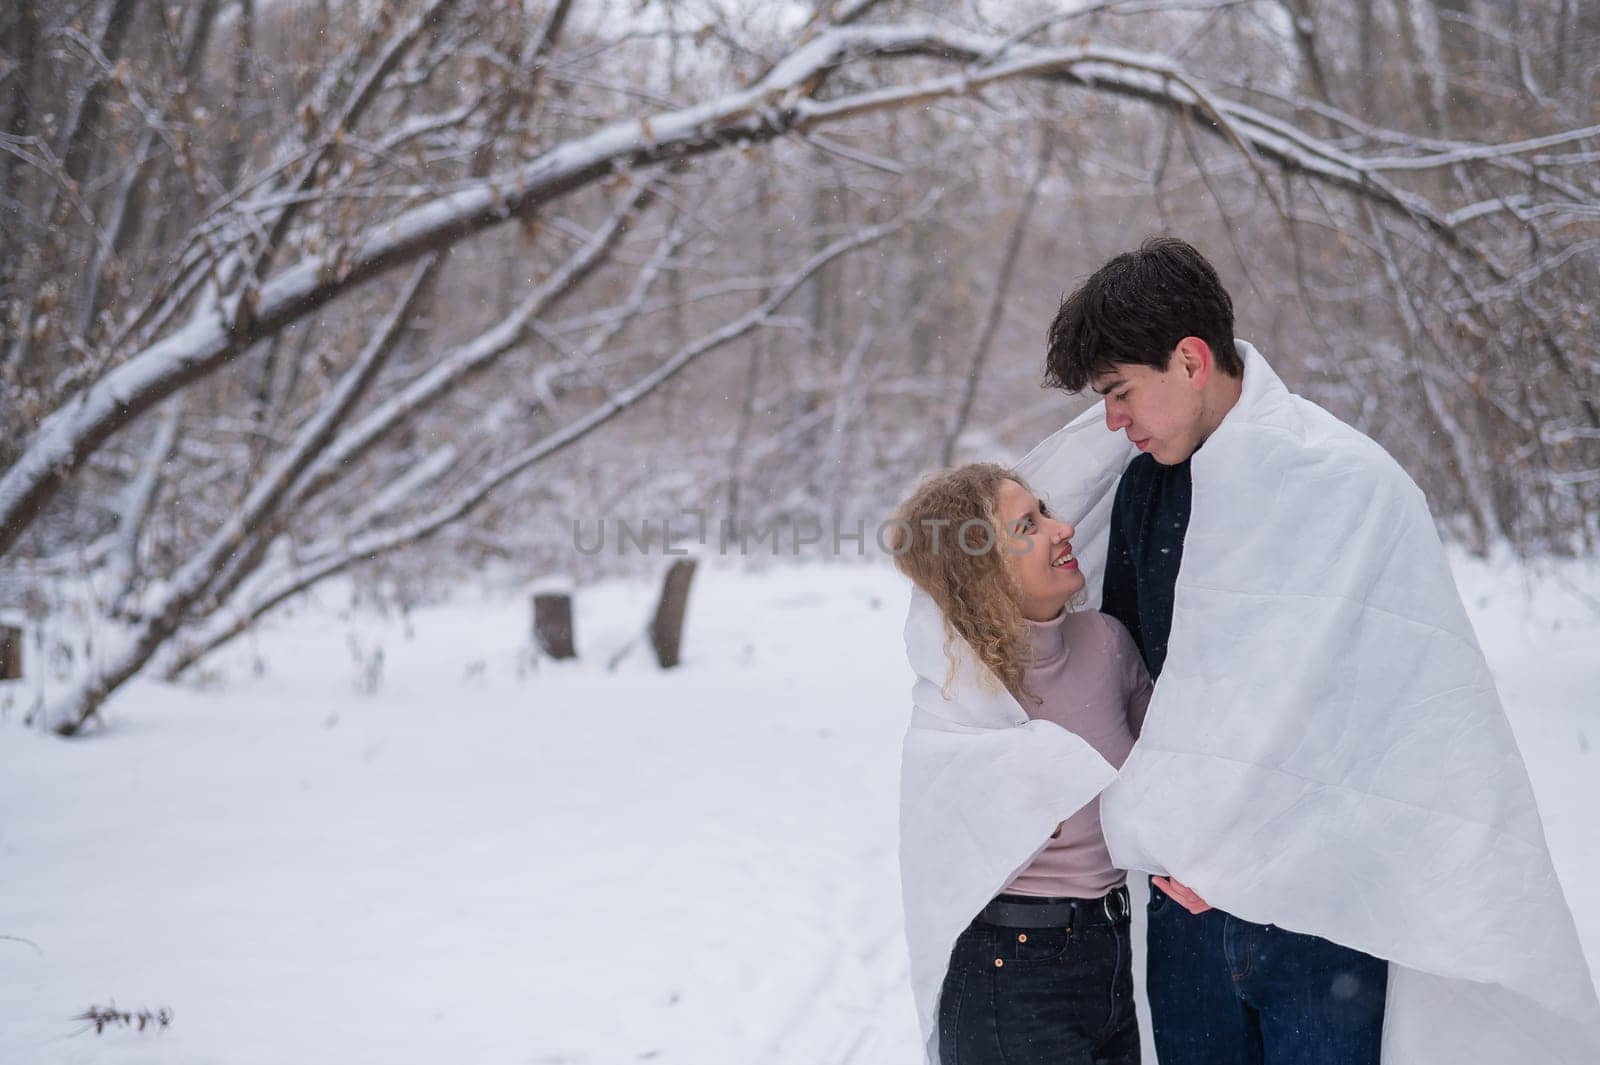 A young couple walks in the park in winter. The guy and the girl are kissing wrapped in a white blanket outdoors